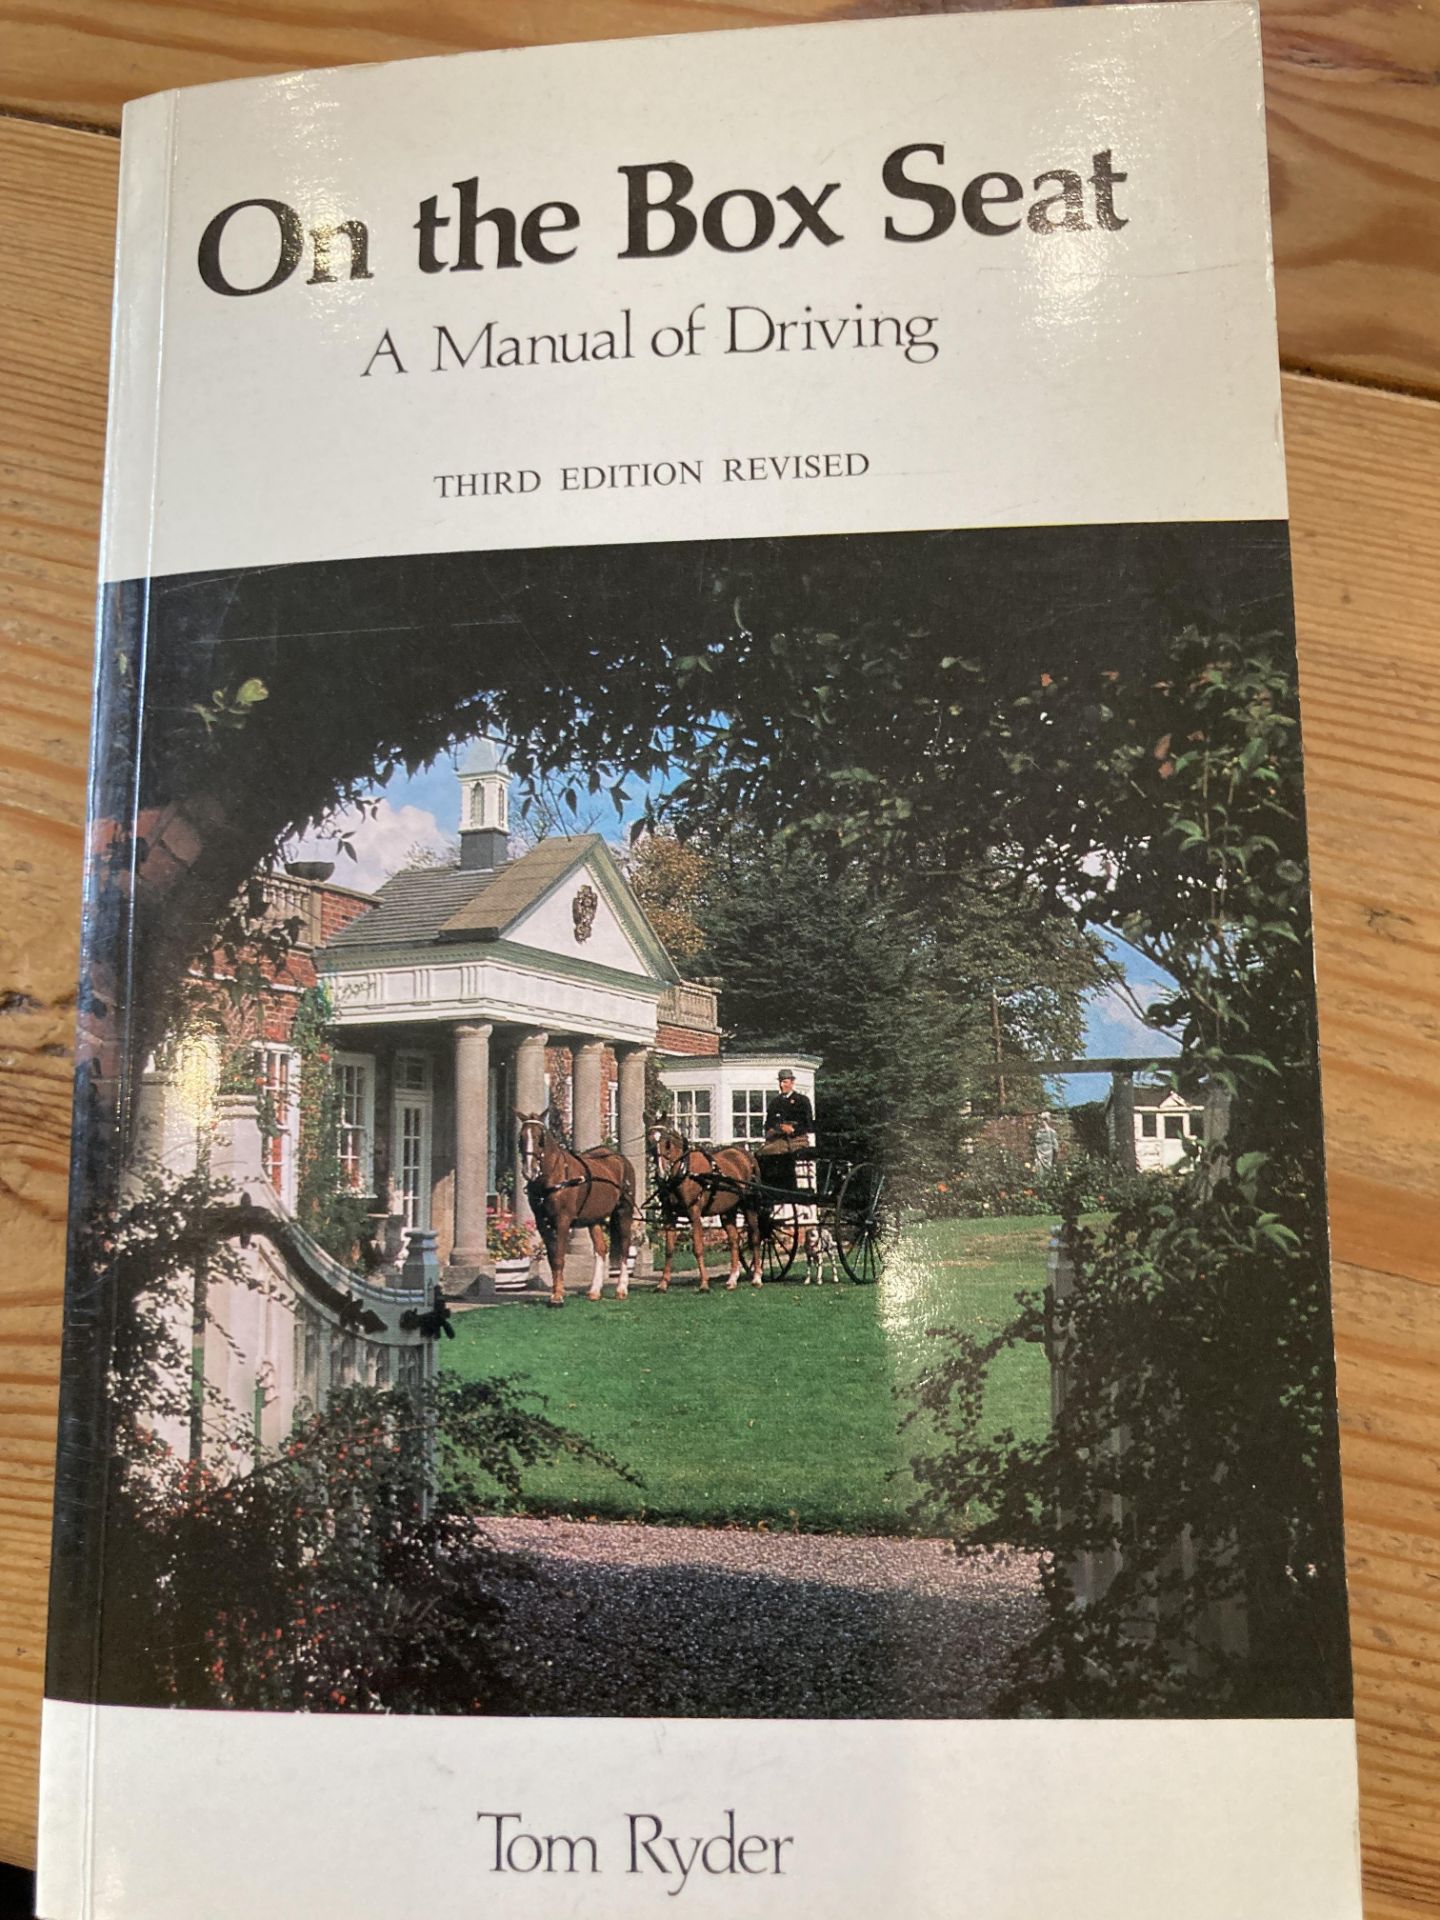 On the Box Seat – A Manual of Driving by Tom Ryder 3rd Edition revised.